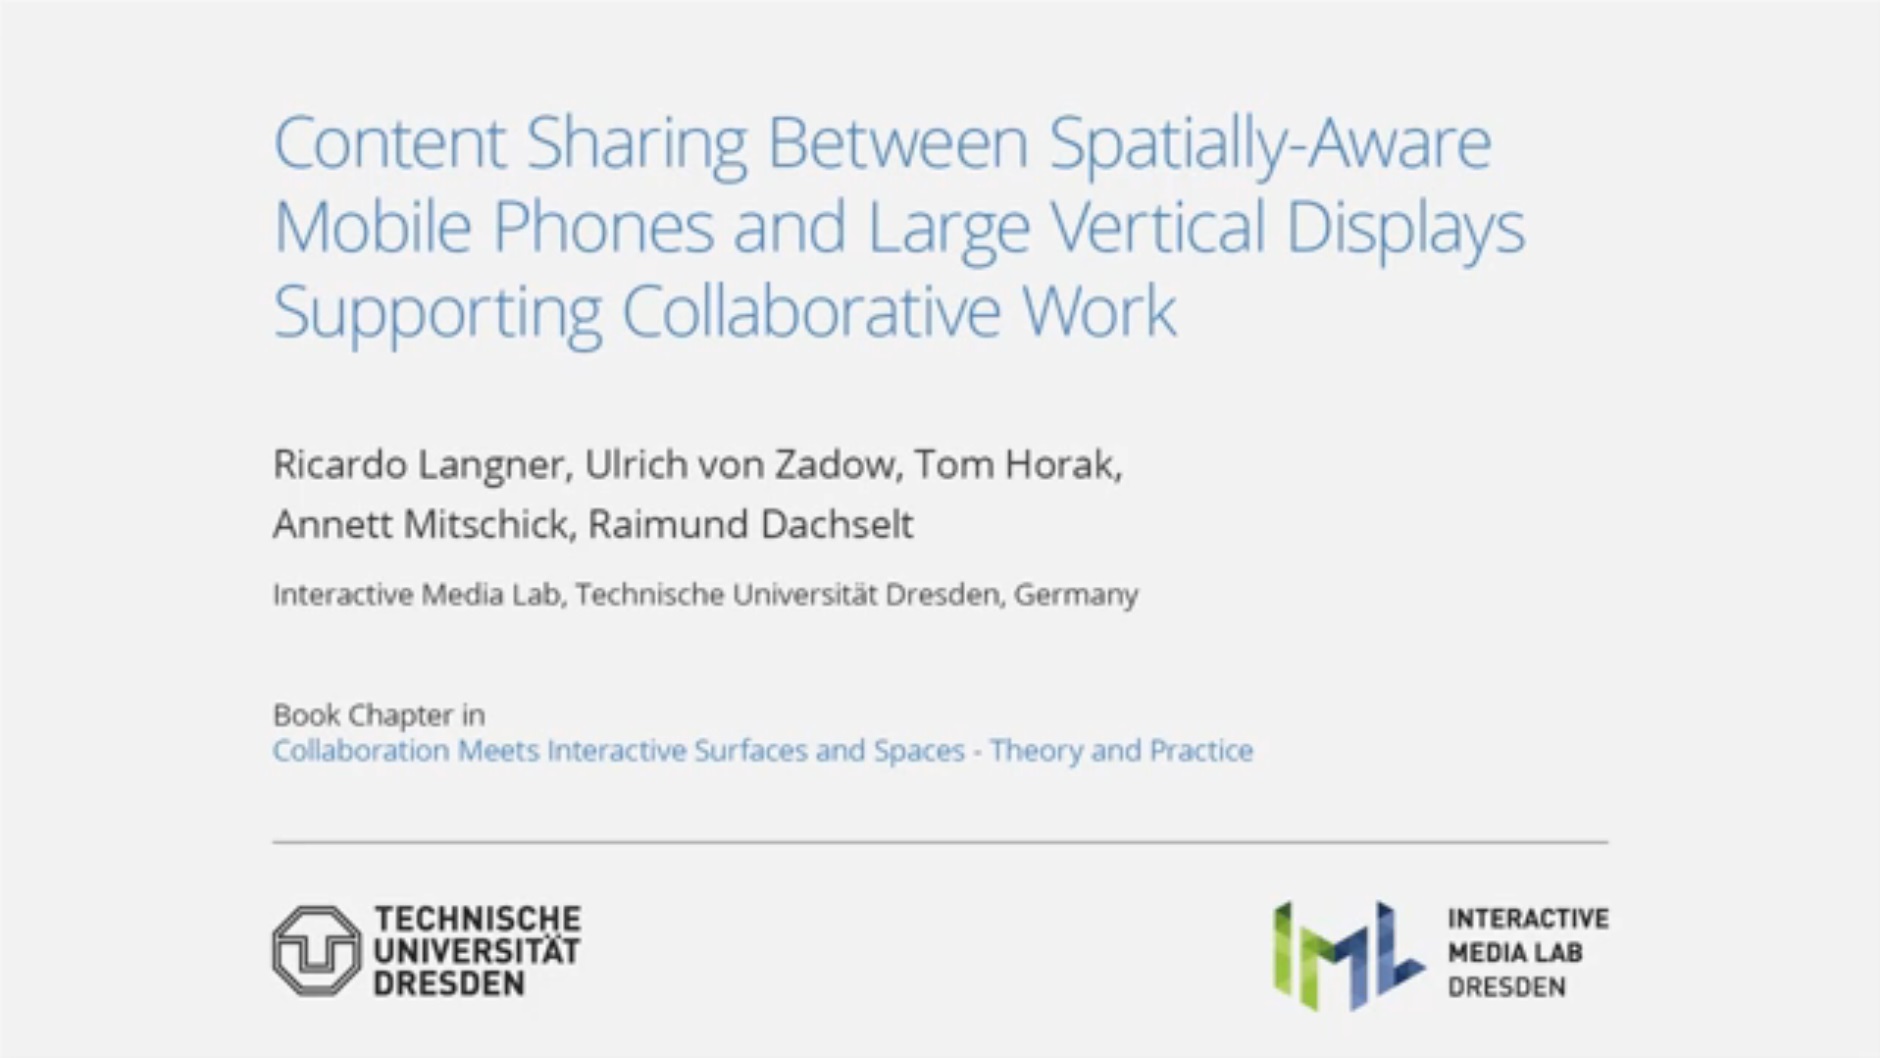 Full video of Content Sharing Between Mobile Devices.